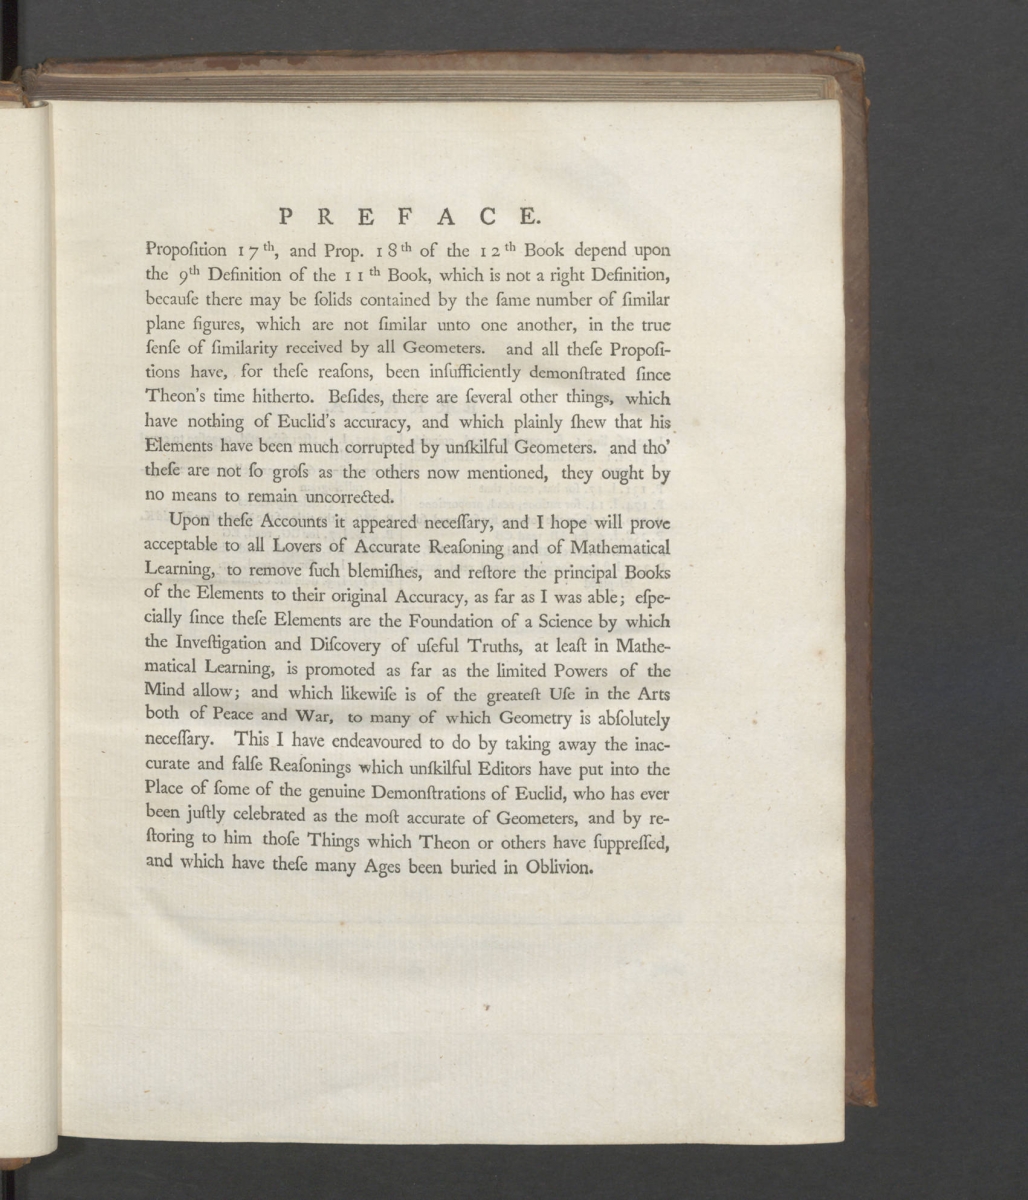 Part of the preface of Robert Simson's 1756 The Elements of Euclid.